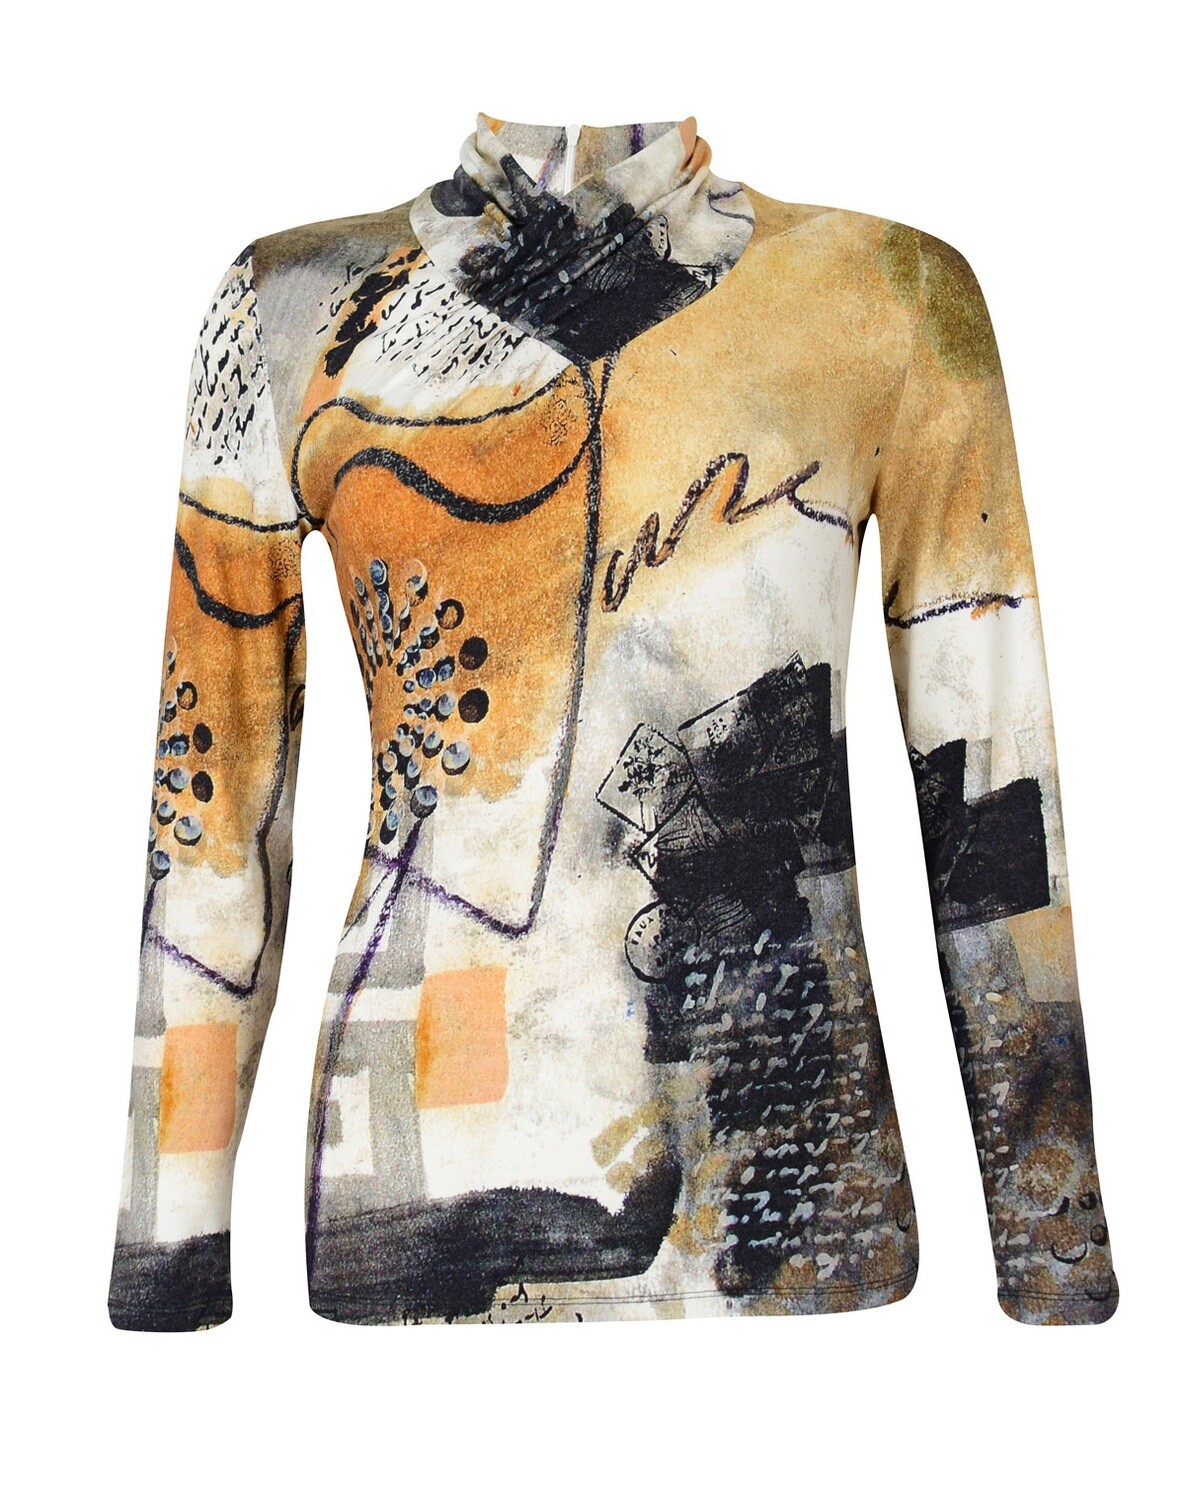 Simply Art Dolcezza: Romantic Rhythm Quilled Abstract Art Tunic SOLD OUT